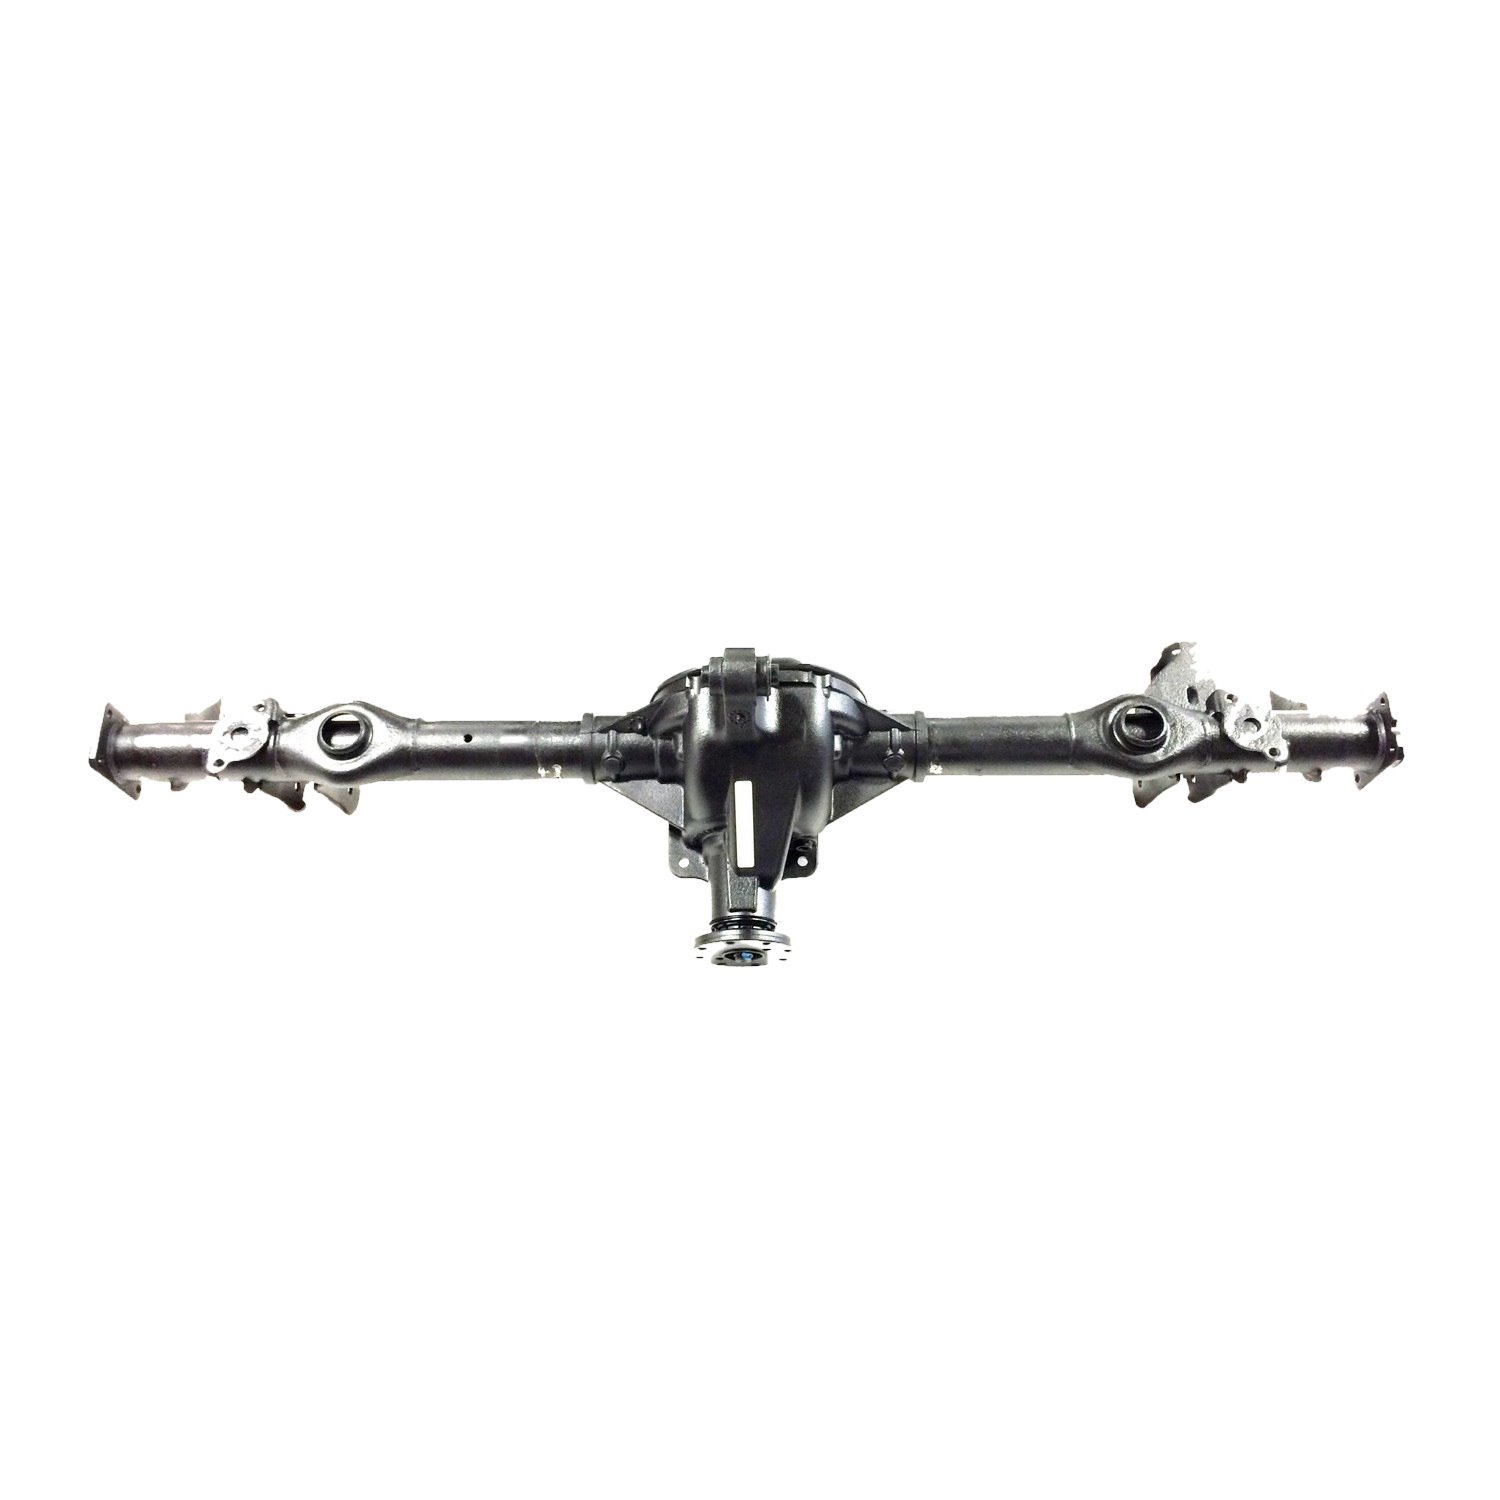 Reman Rear Axle Assembly, Getrag 7.625 in., 2008-14 Cadillac CTS, 3.23 Ratio